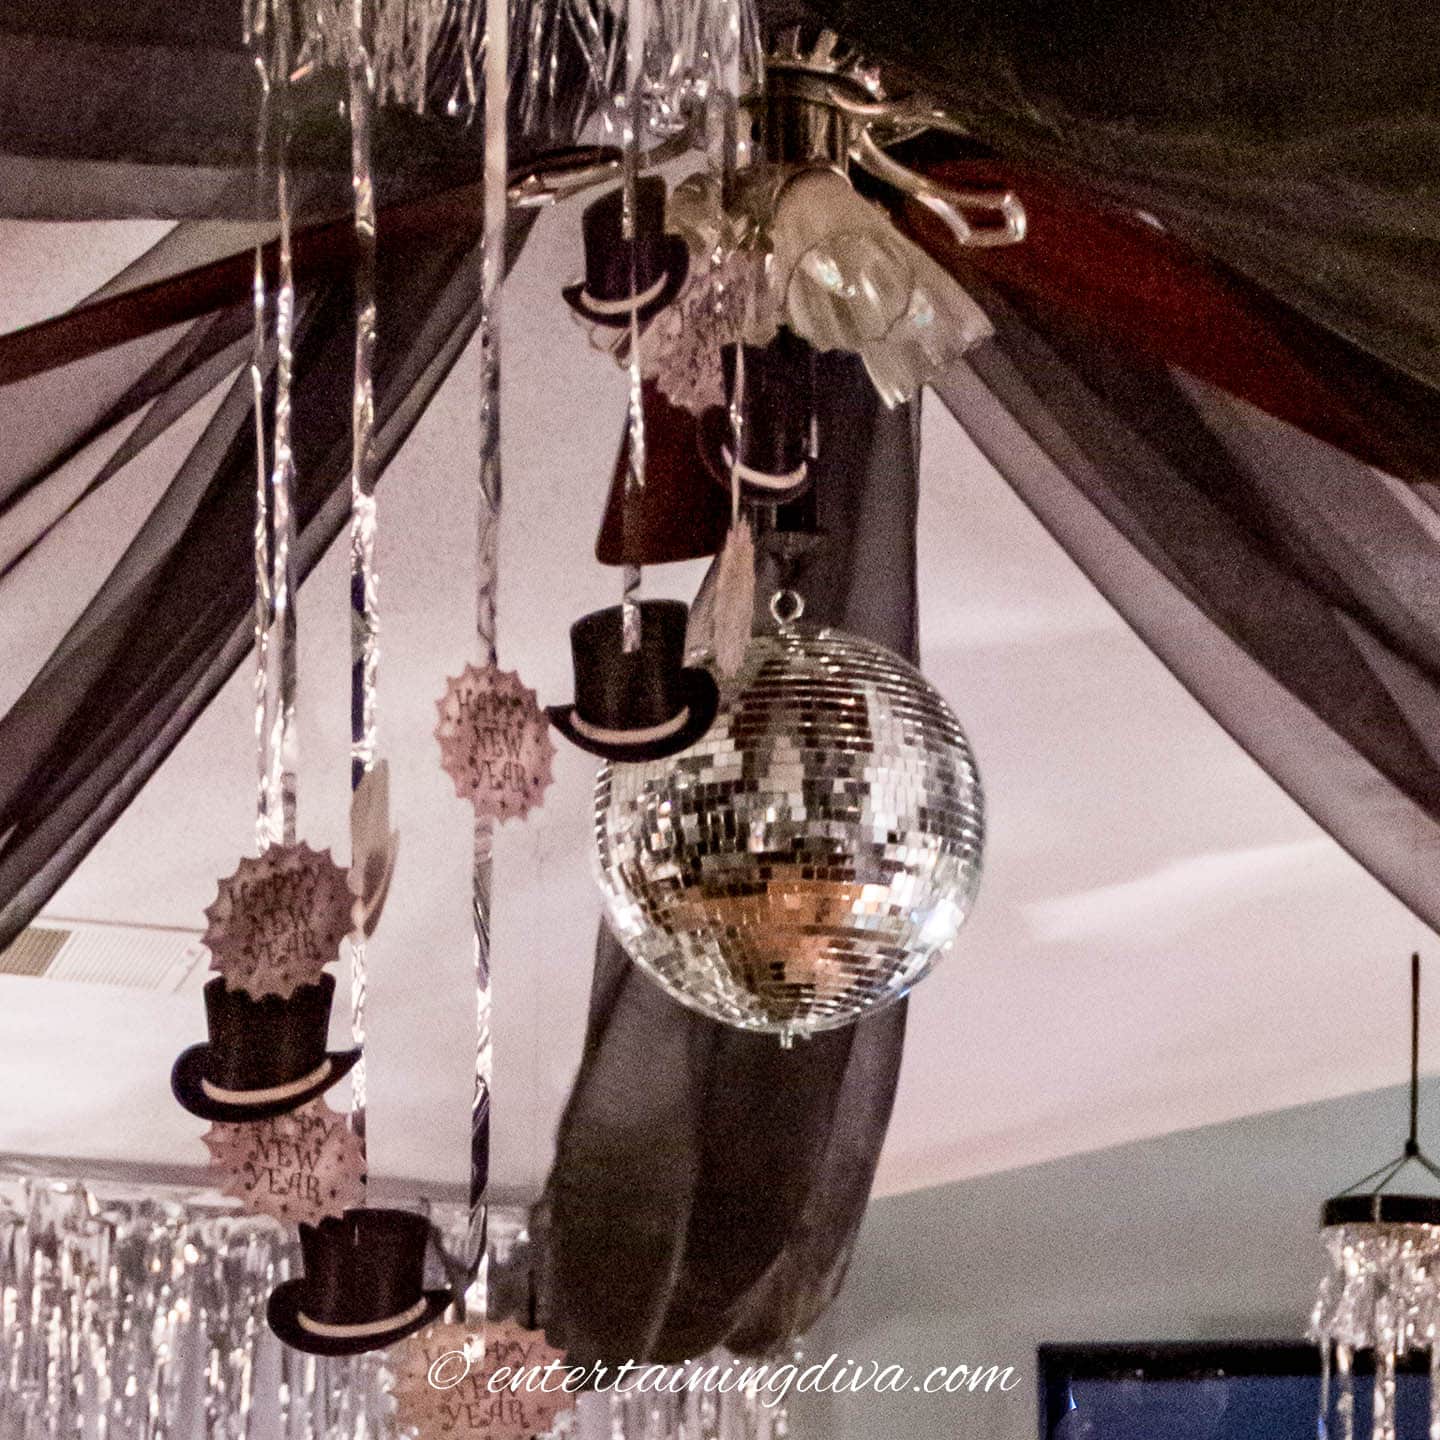 A mirror ball hung from the ceiling